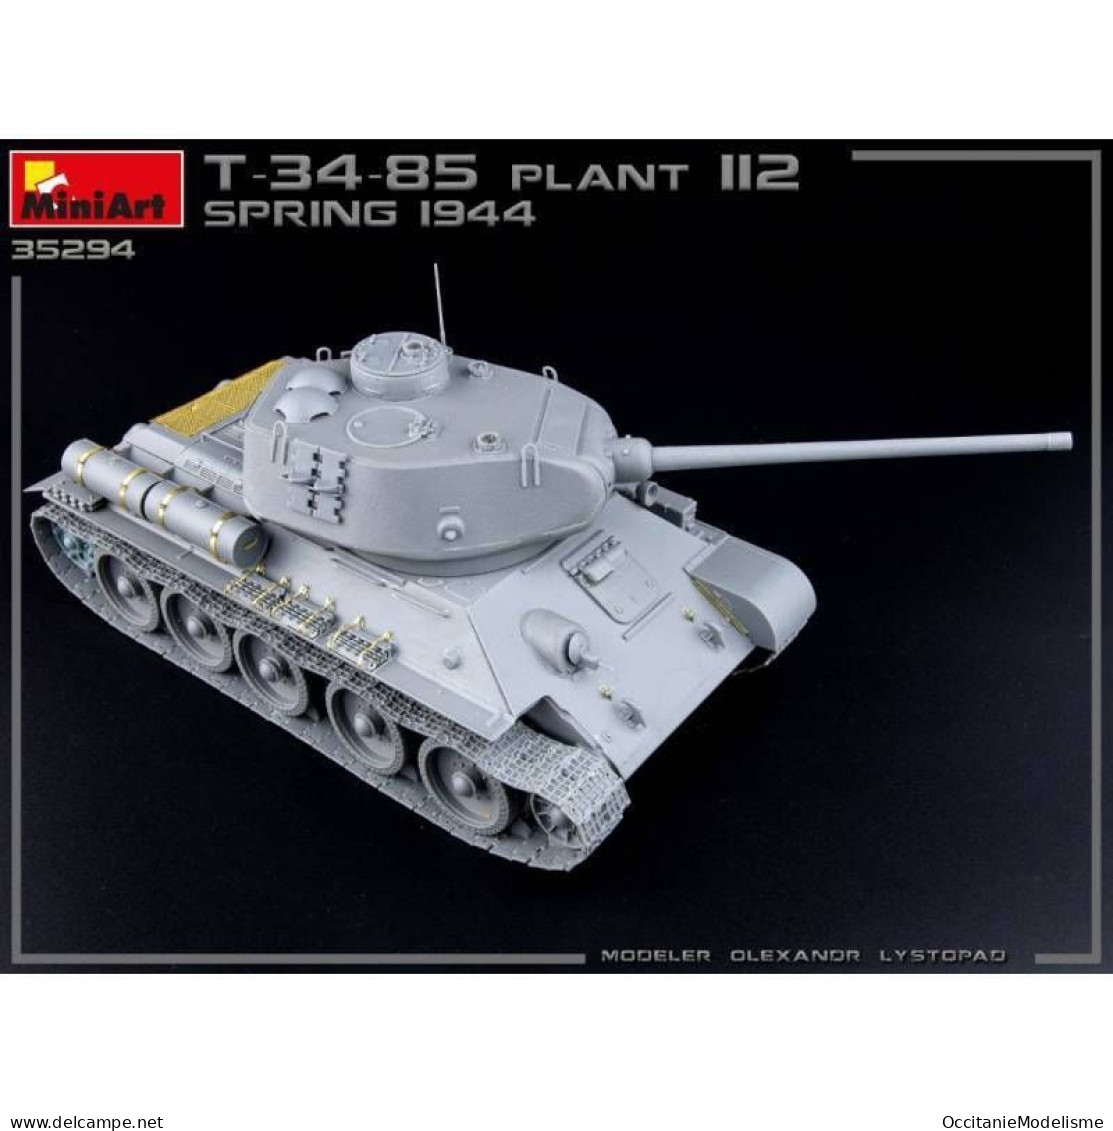 Miniart - CHAR T-34/85 Plant 112 Spring 1944 maquette réf. 35294 Neuf NBO 1/35